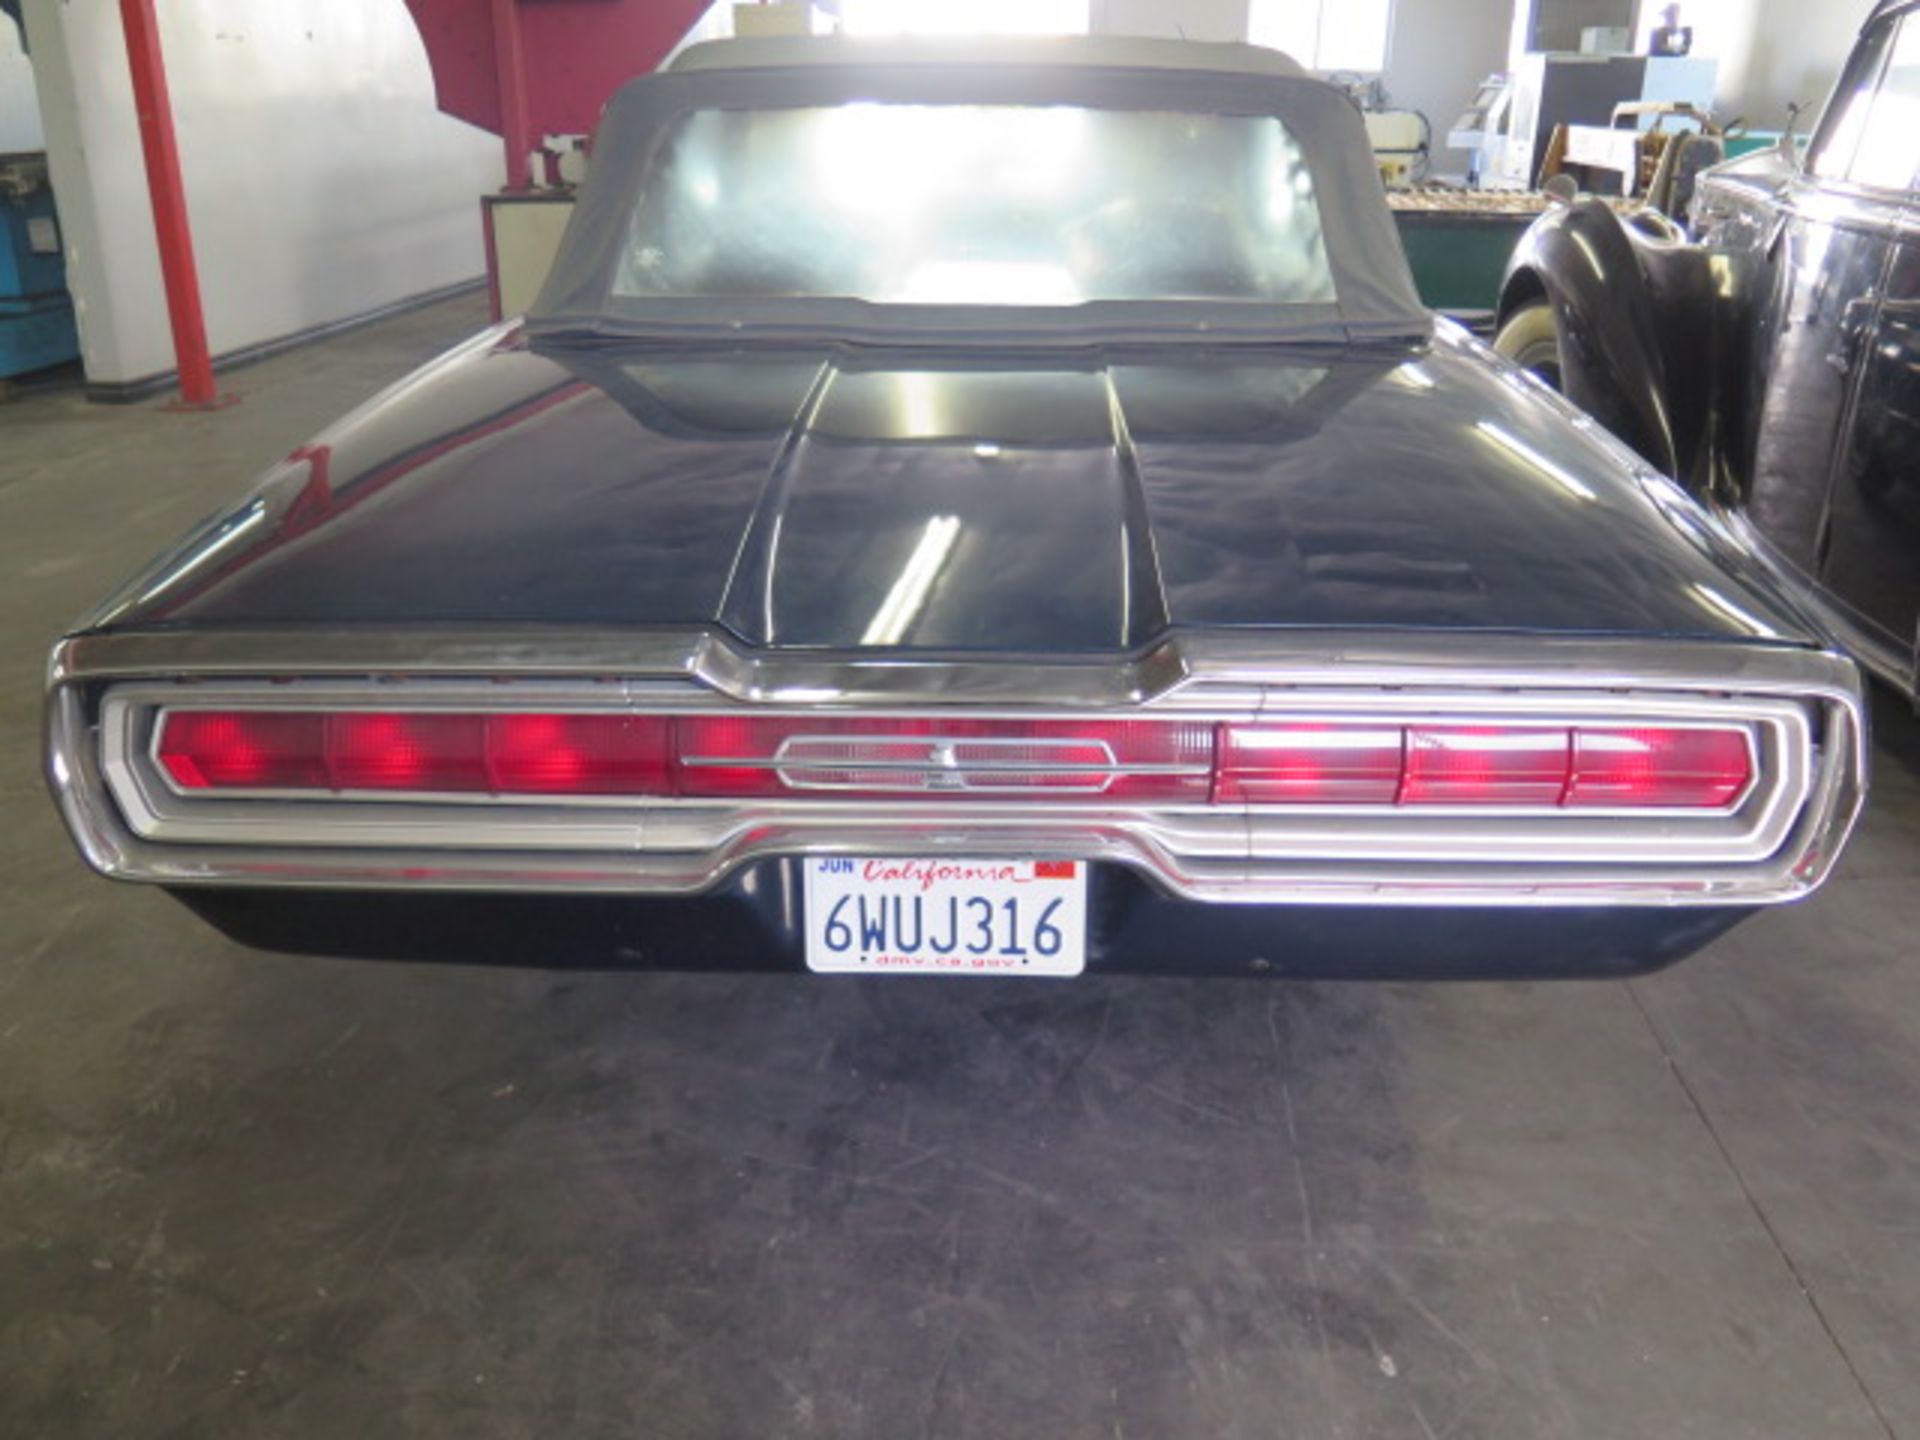 1966 Ford Thunderbird Convertible w/ “Q” Designation V8 428 CID 4 Barrel Carb Gas, SOLD AS IS - Image 7 of 46